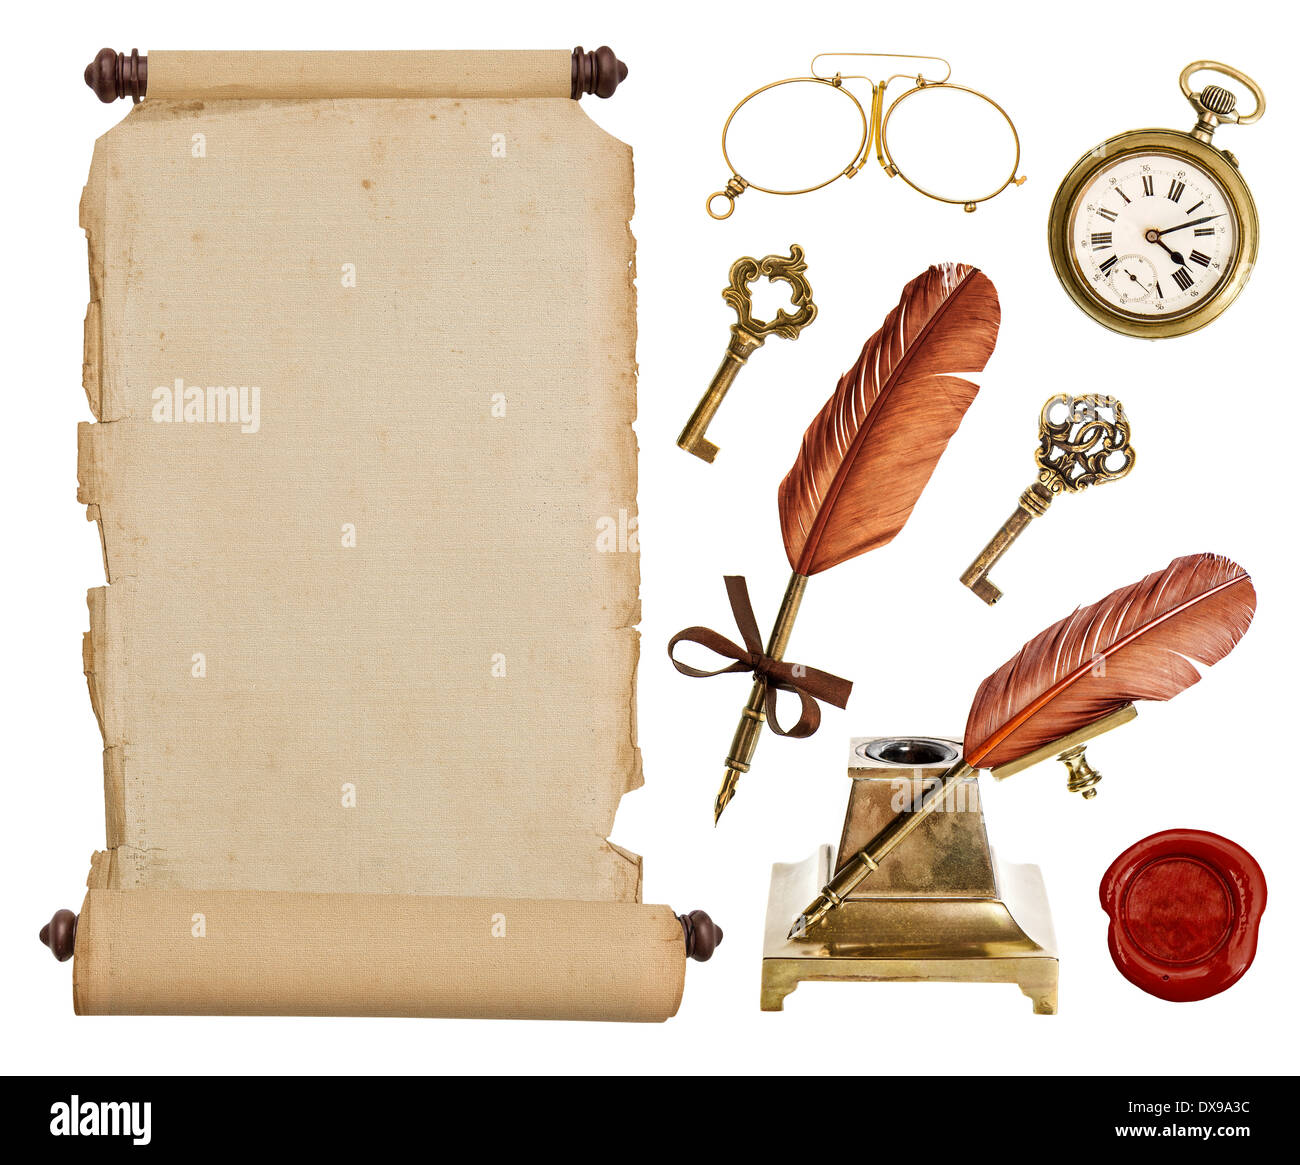 Old vintage paper scroll and antique accessories isolated on white background. Stock Photo